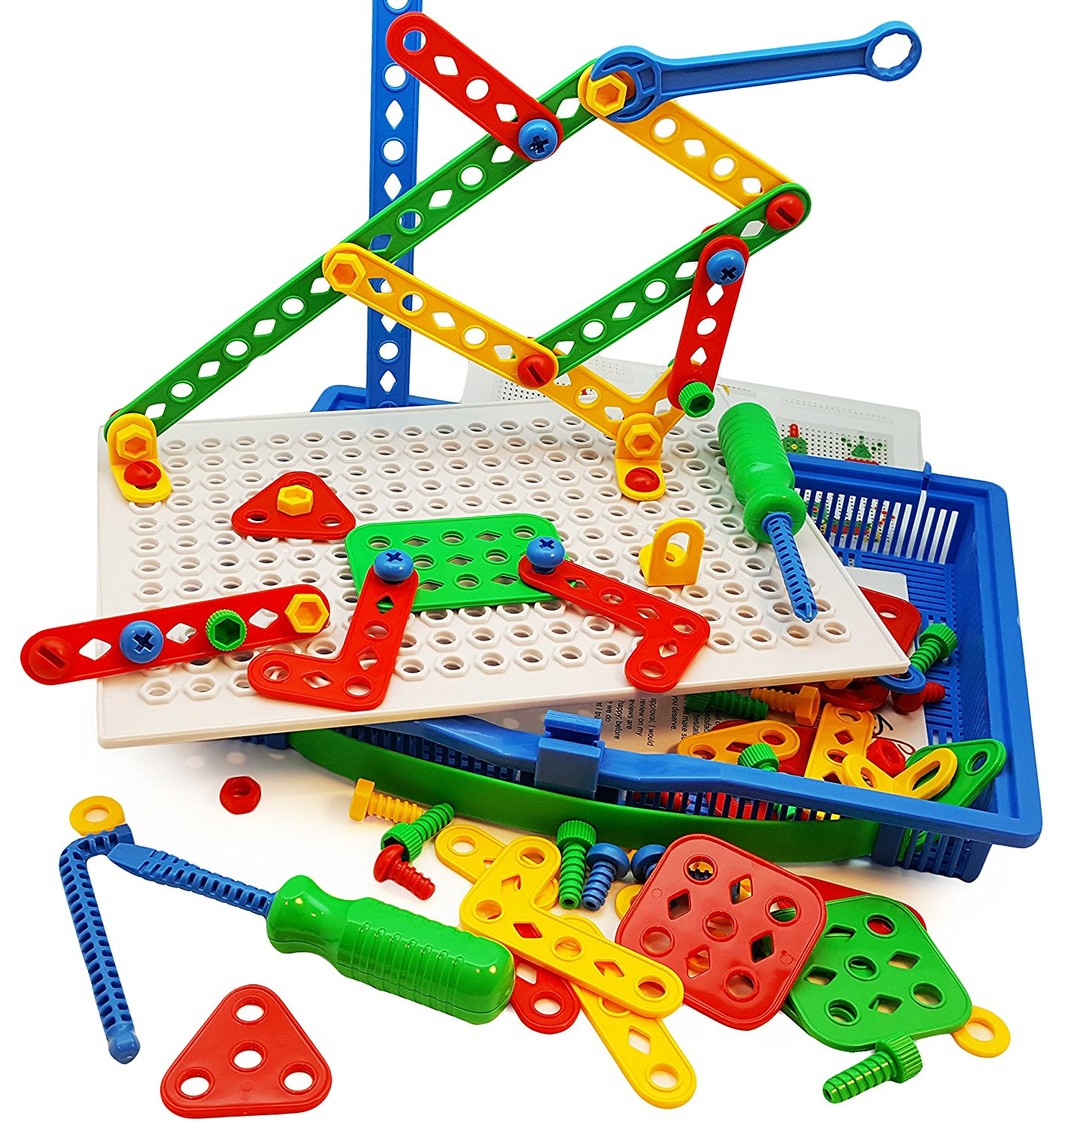 Best Construction Building Toys For Preschoolers Toddlers By Skoolzy Complete Construction Building Toys Tool Kit